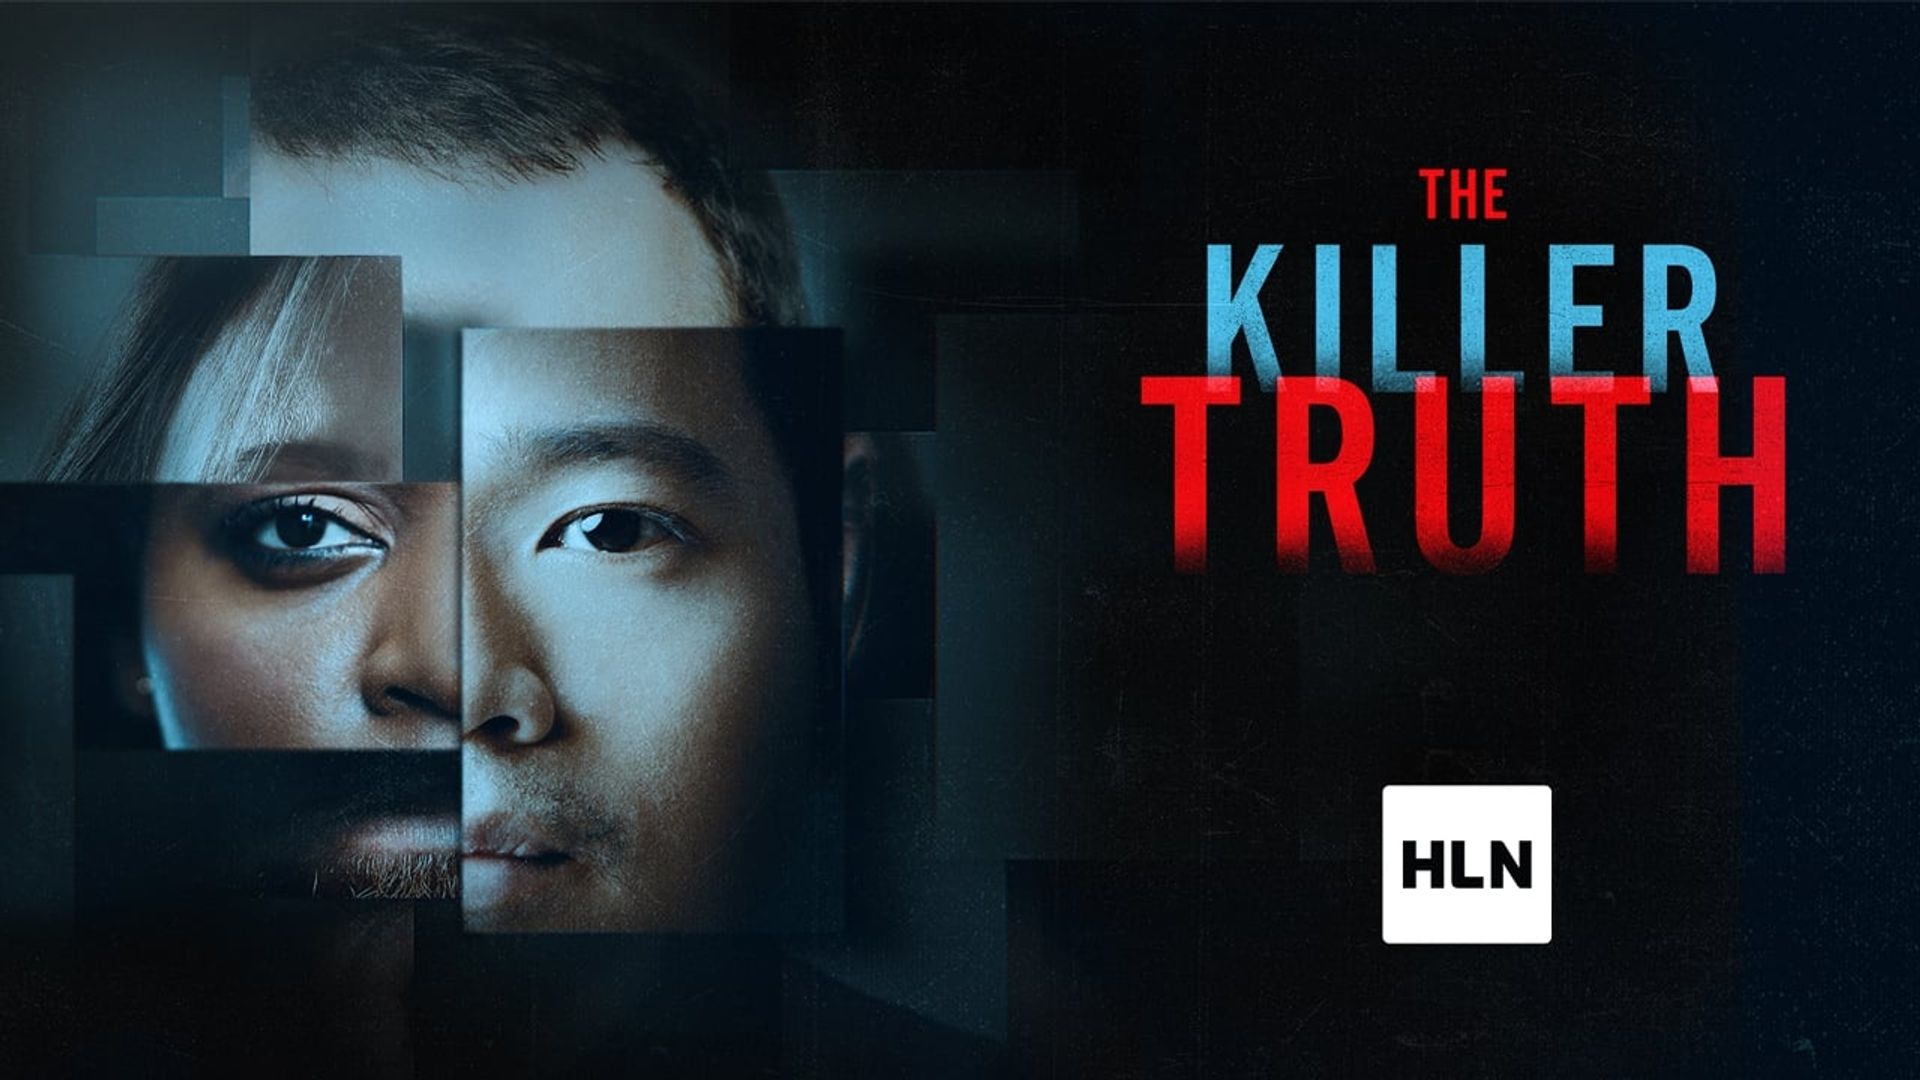 The Killer Truth background